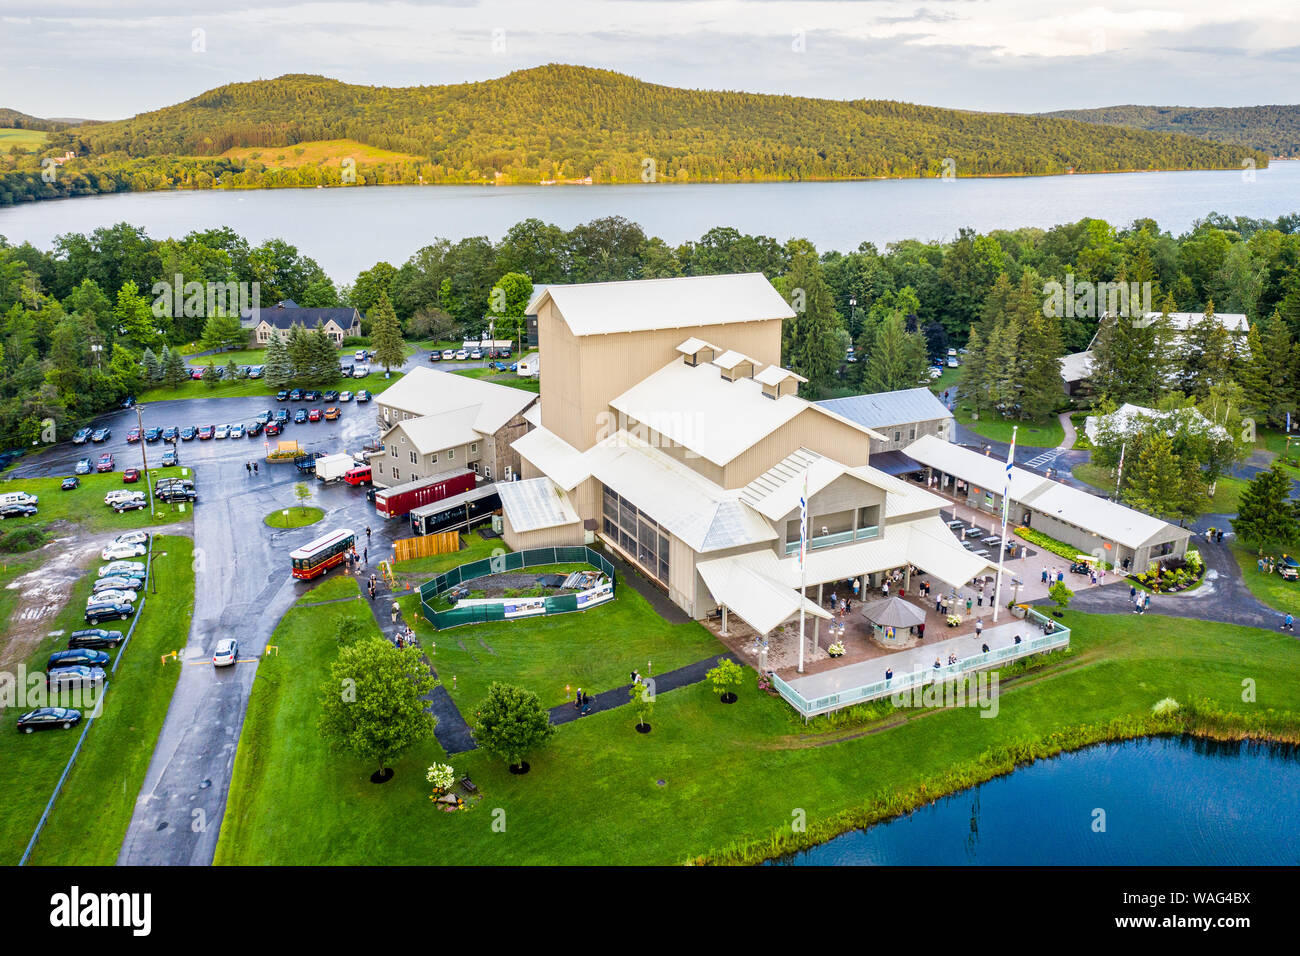 Alice Busch Opera Theater, home of the Glimmerglass Festival, Cooperstown, NY, USA Stock Photo